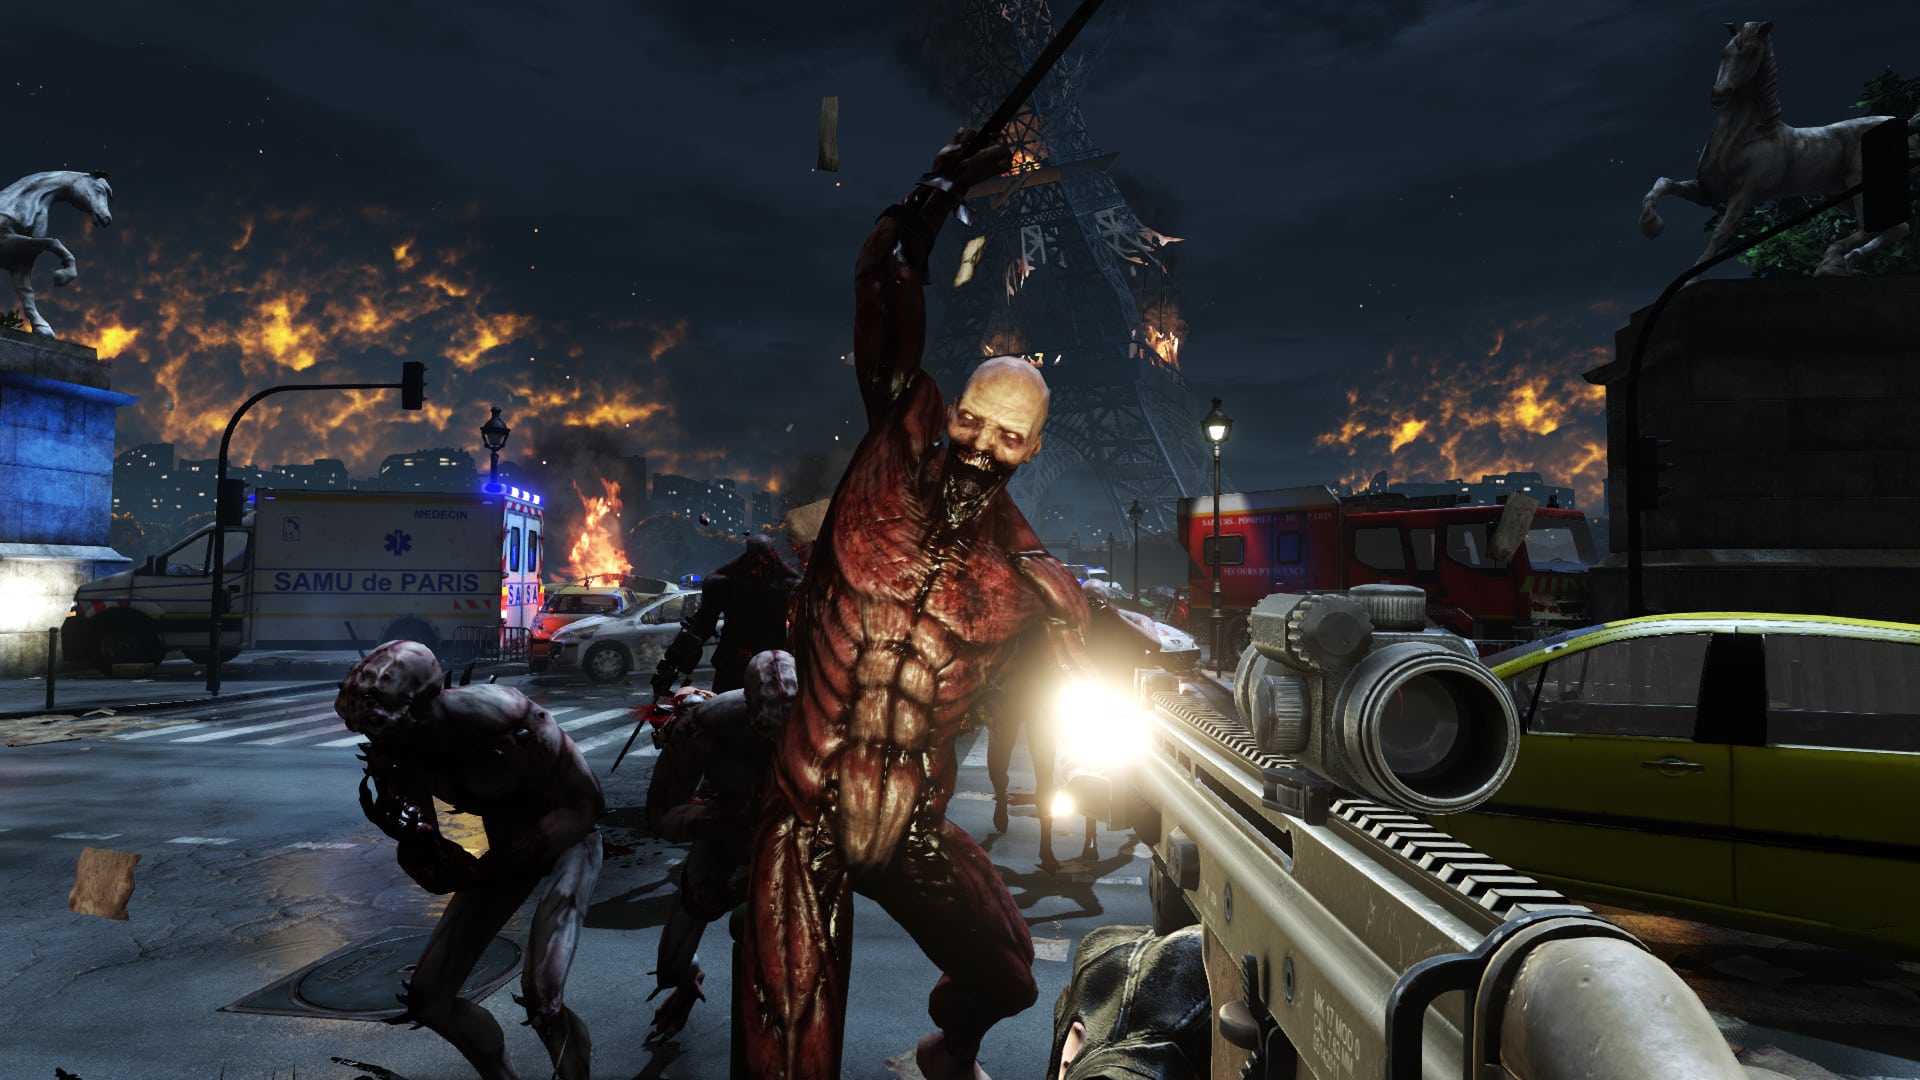 Free from Epic Games: Killing Floor 2 outshines everything